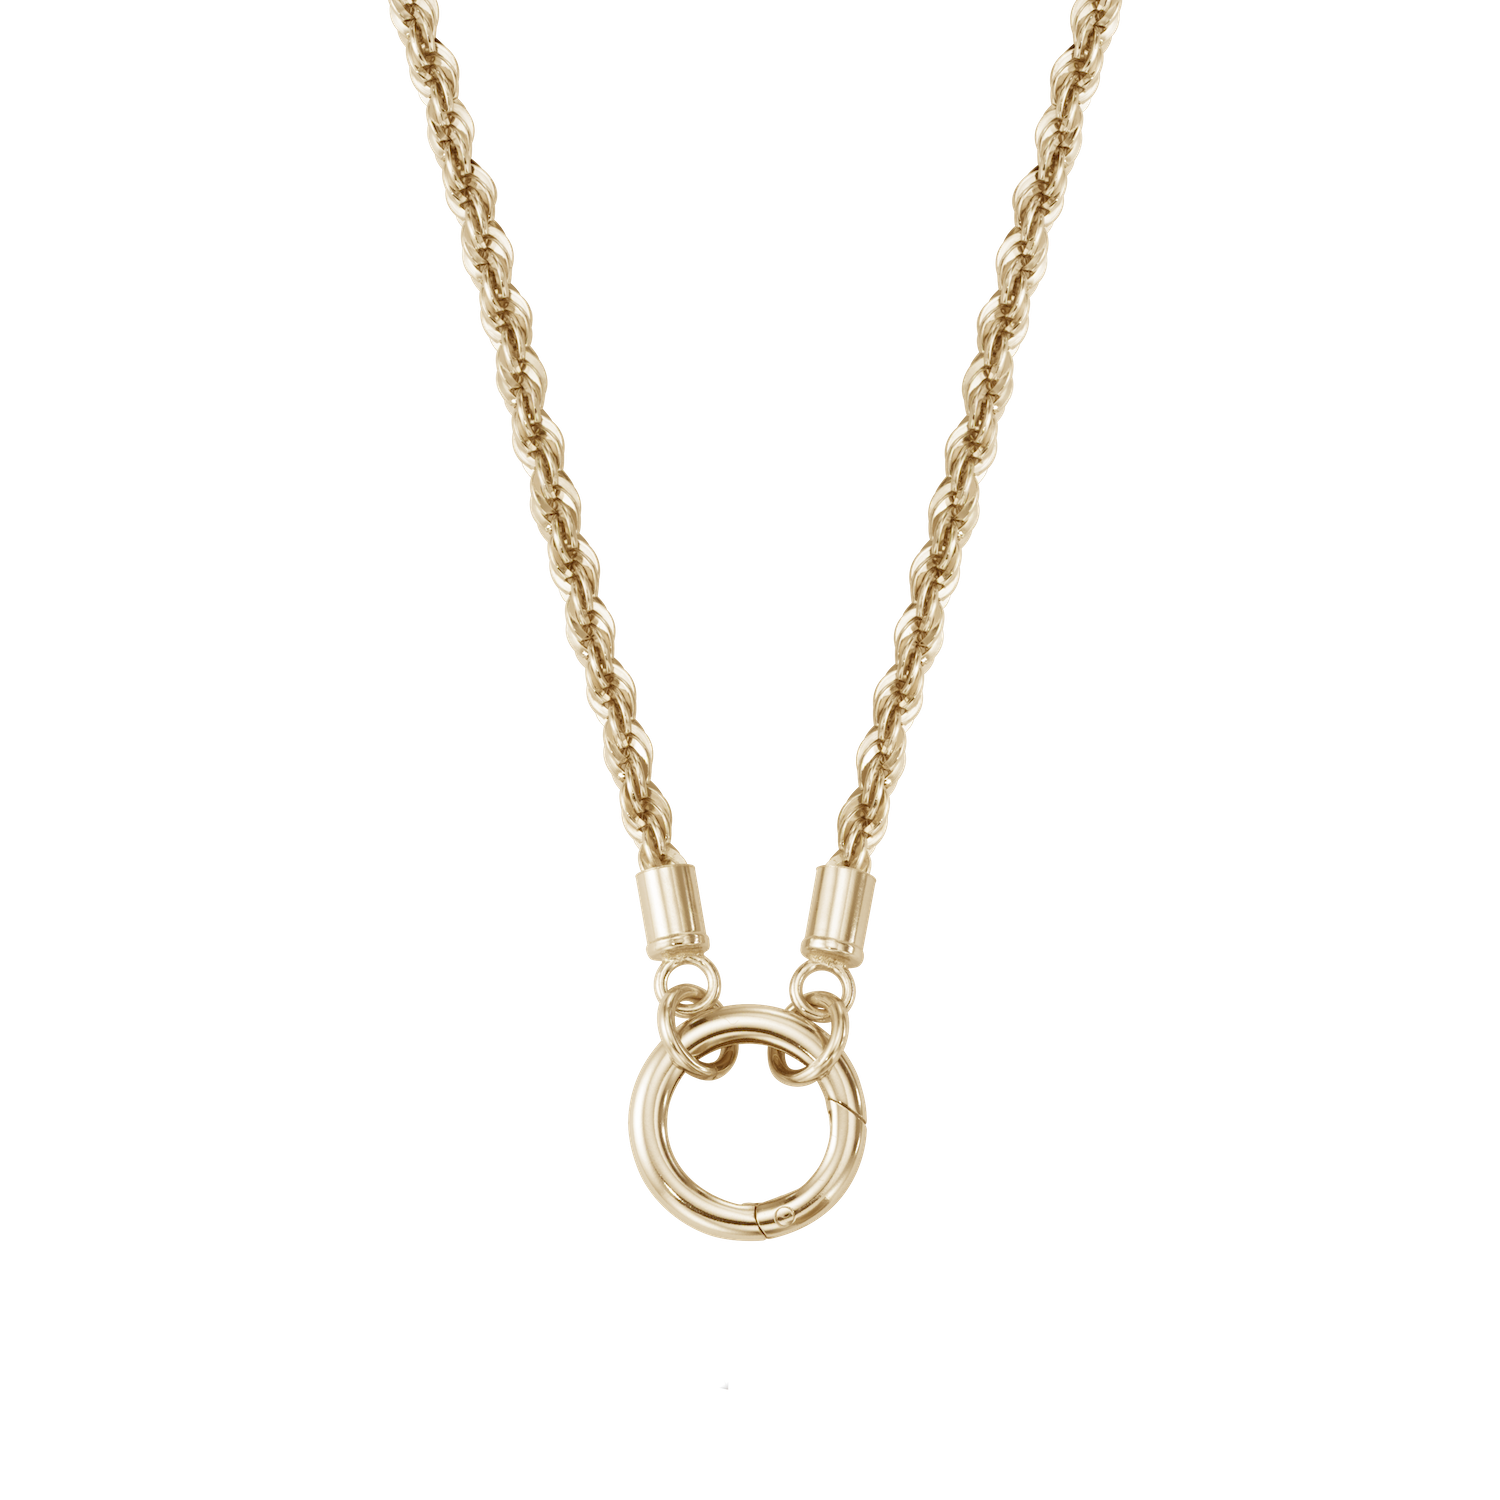 Inspired Essentials Rope Chain Loop Charm Necklace - 18"